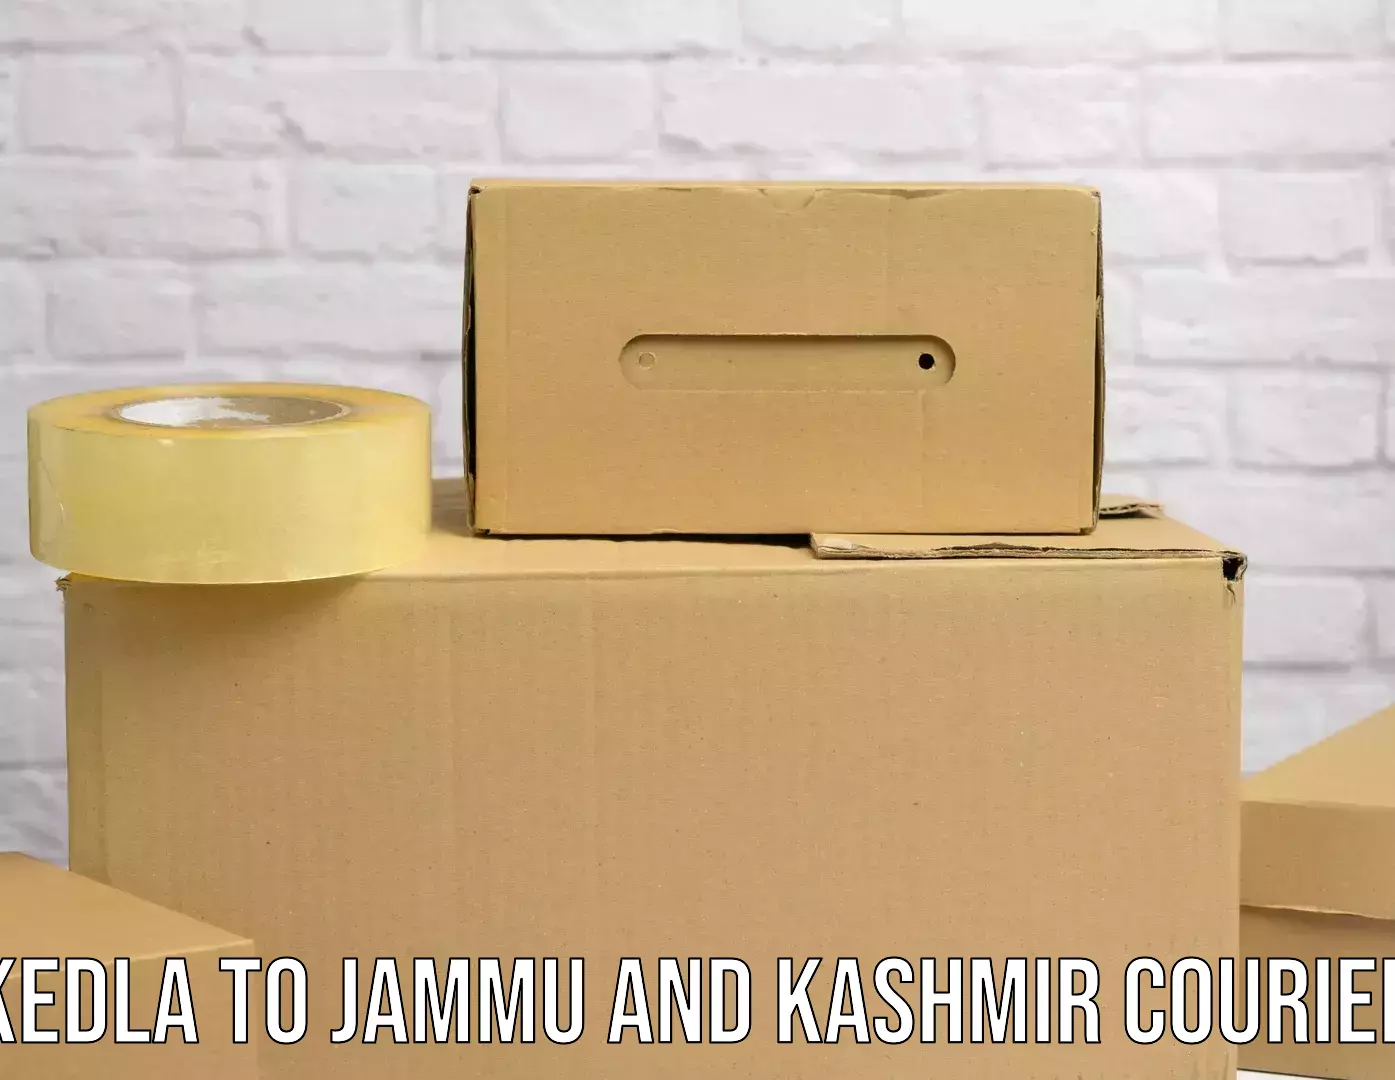 High-quality delivery services in Kedla to Jammu and Kashmir